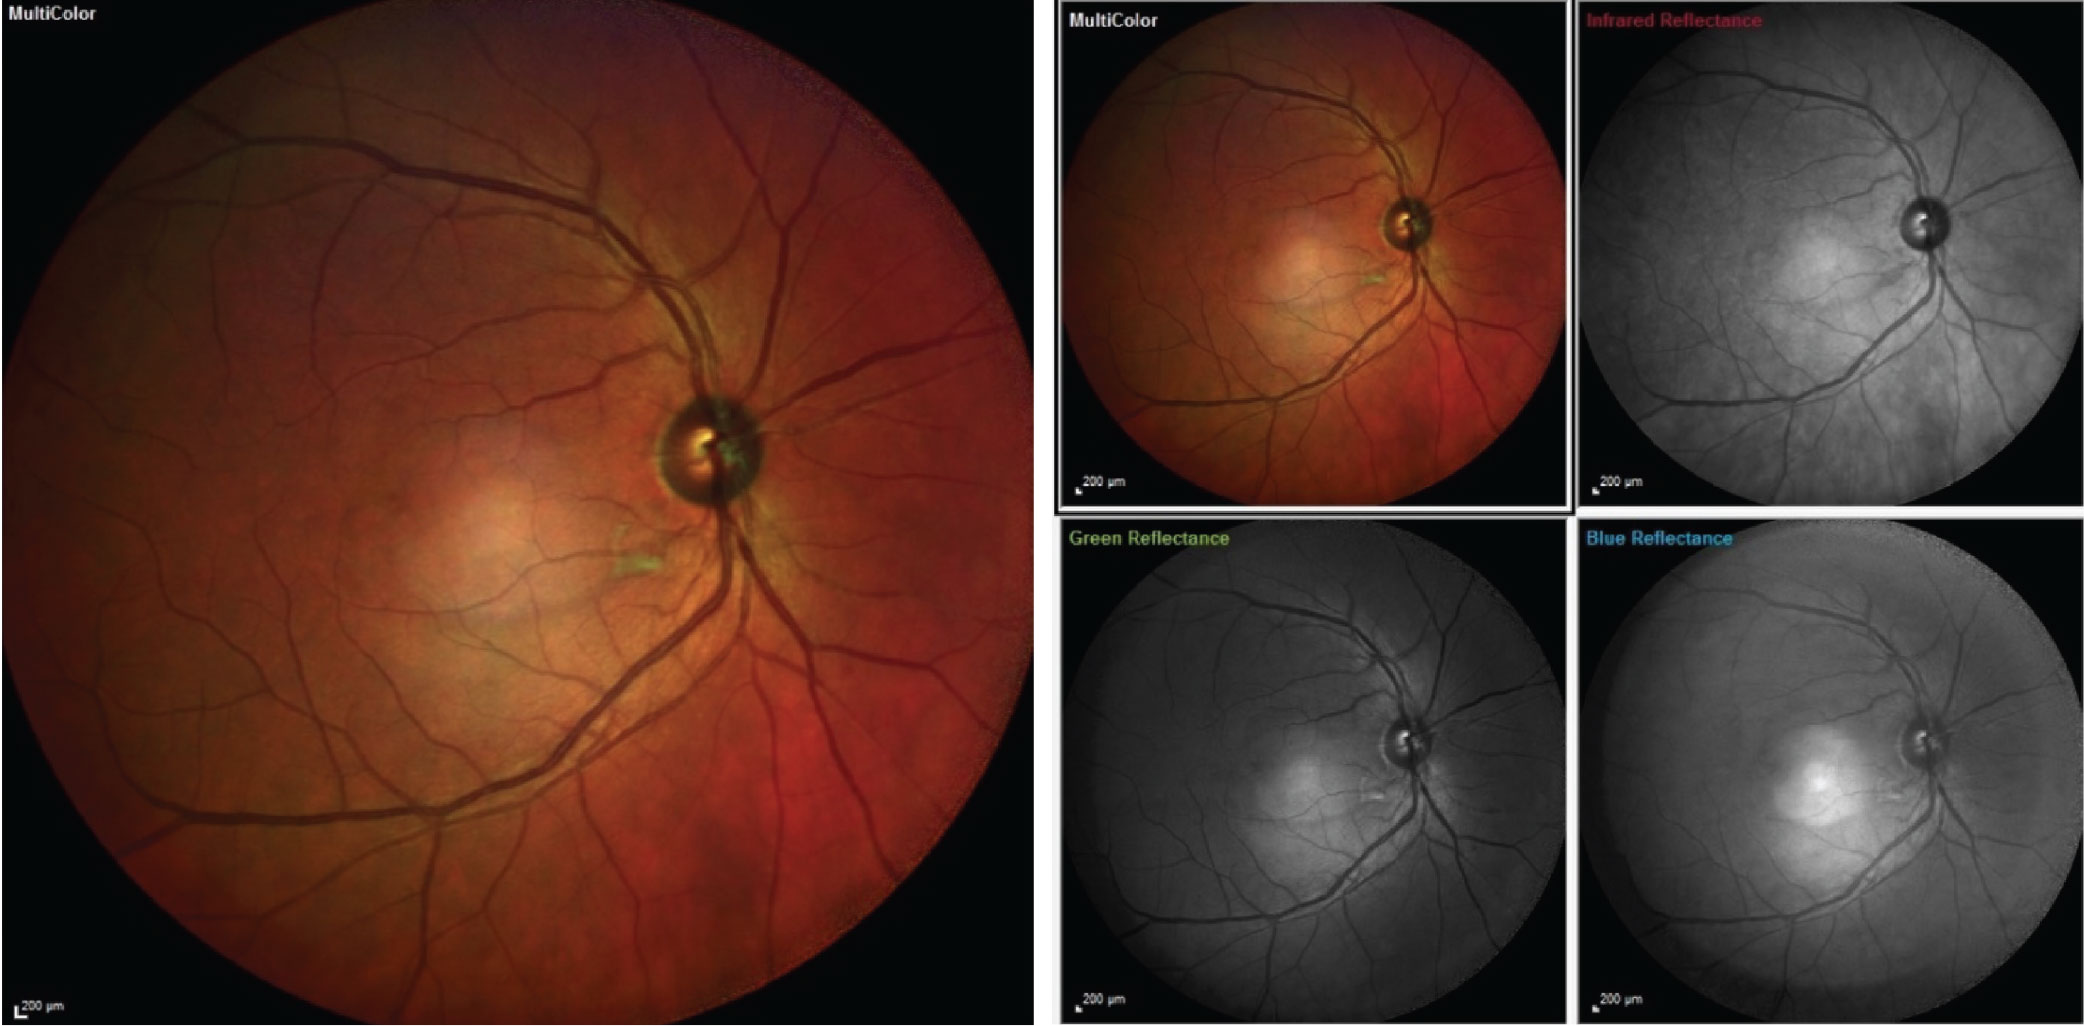 The patient’s initial visit in 2018 showed only one isolated cotton wool spot along the inferior arcade, which is consistent with the iris neovascularization, ocular ischemia and complaints of visual disturbances.